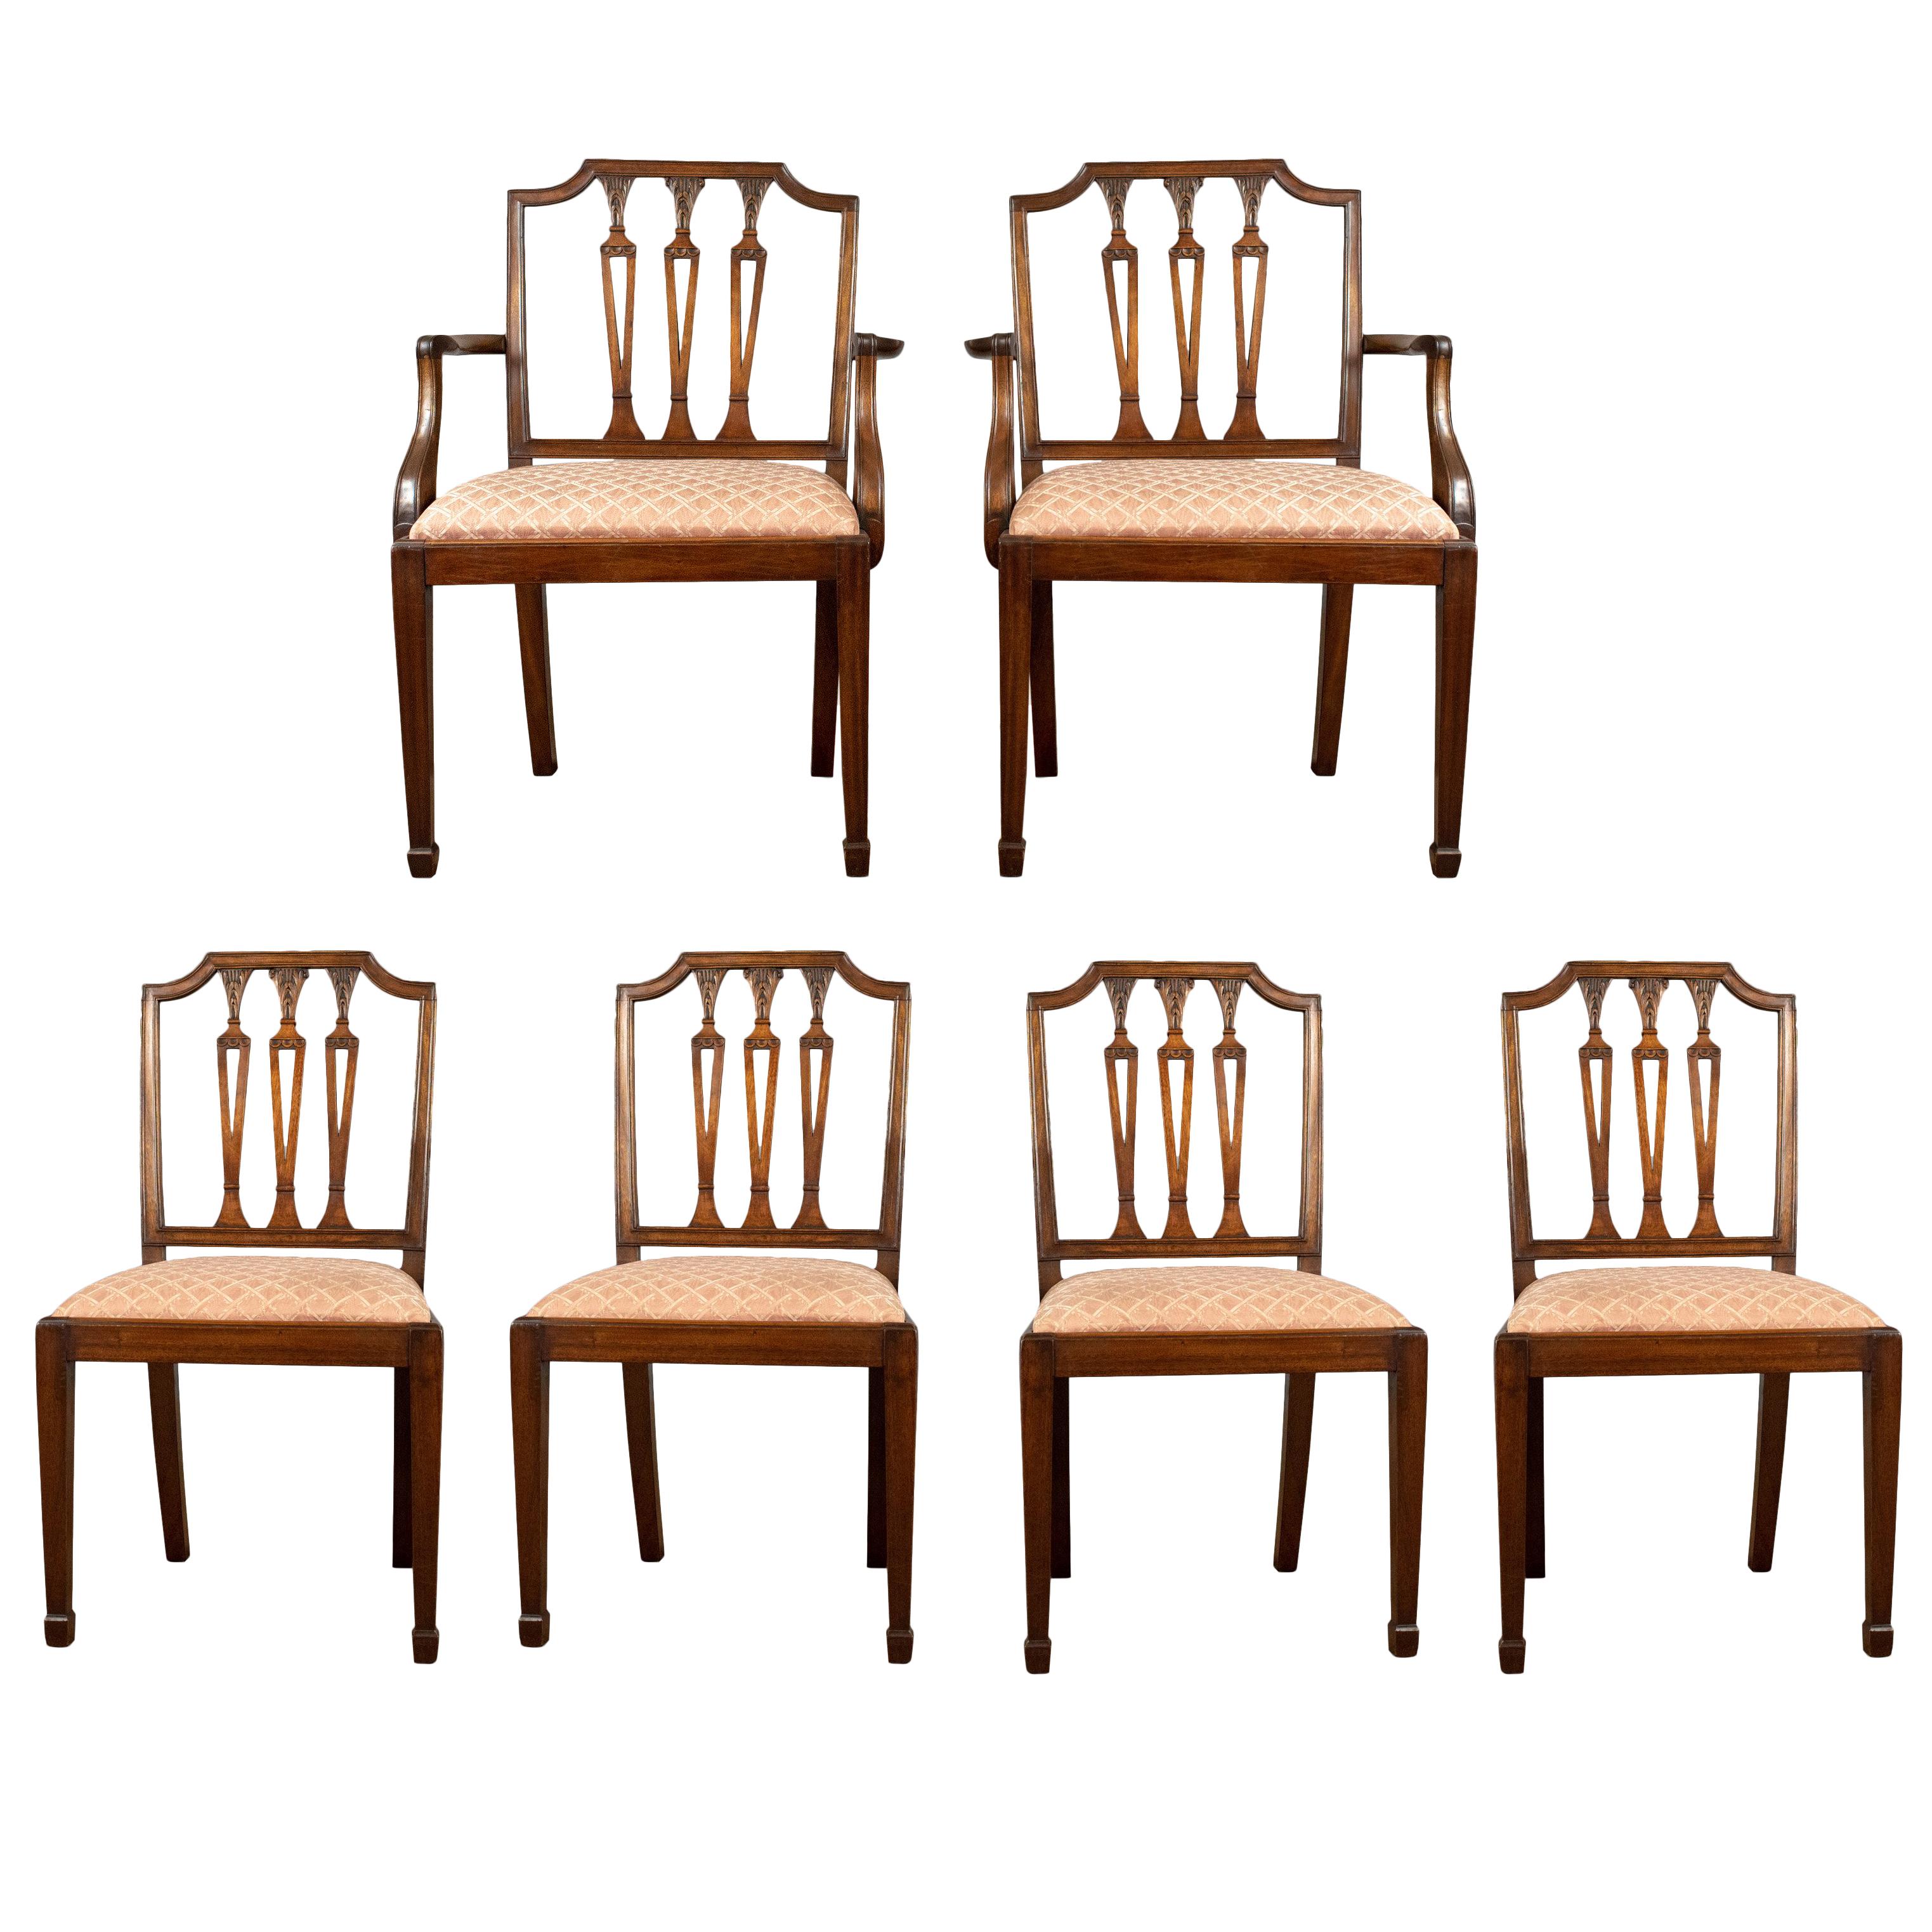 Set of Six Antique Dining Chairs, Mahogany, Victorian, Sheraton Revival